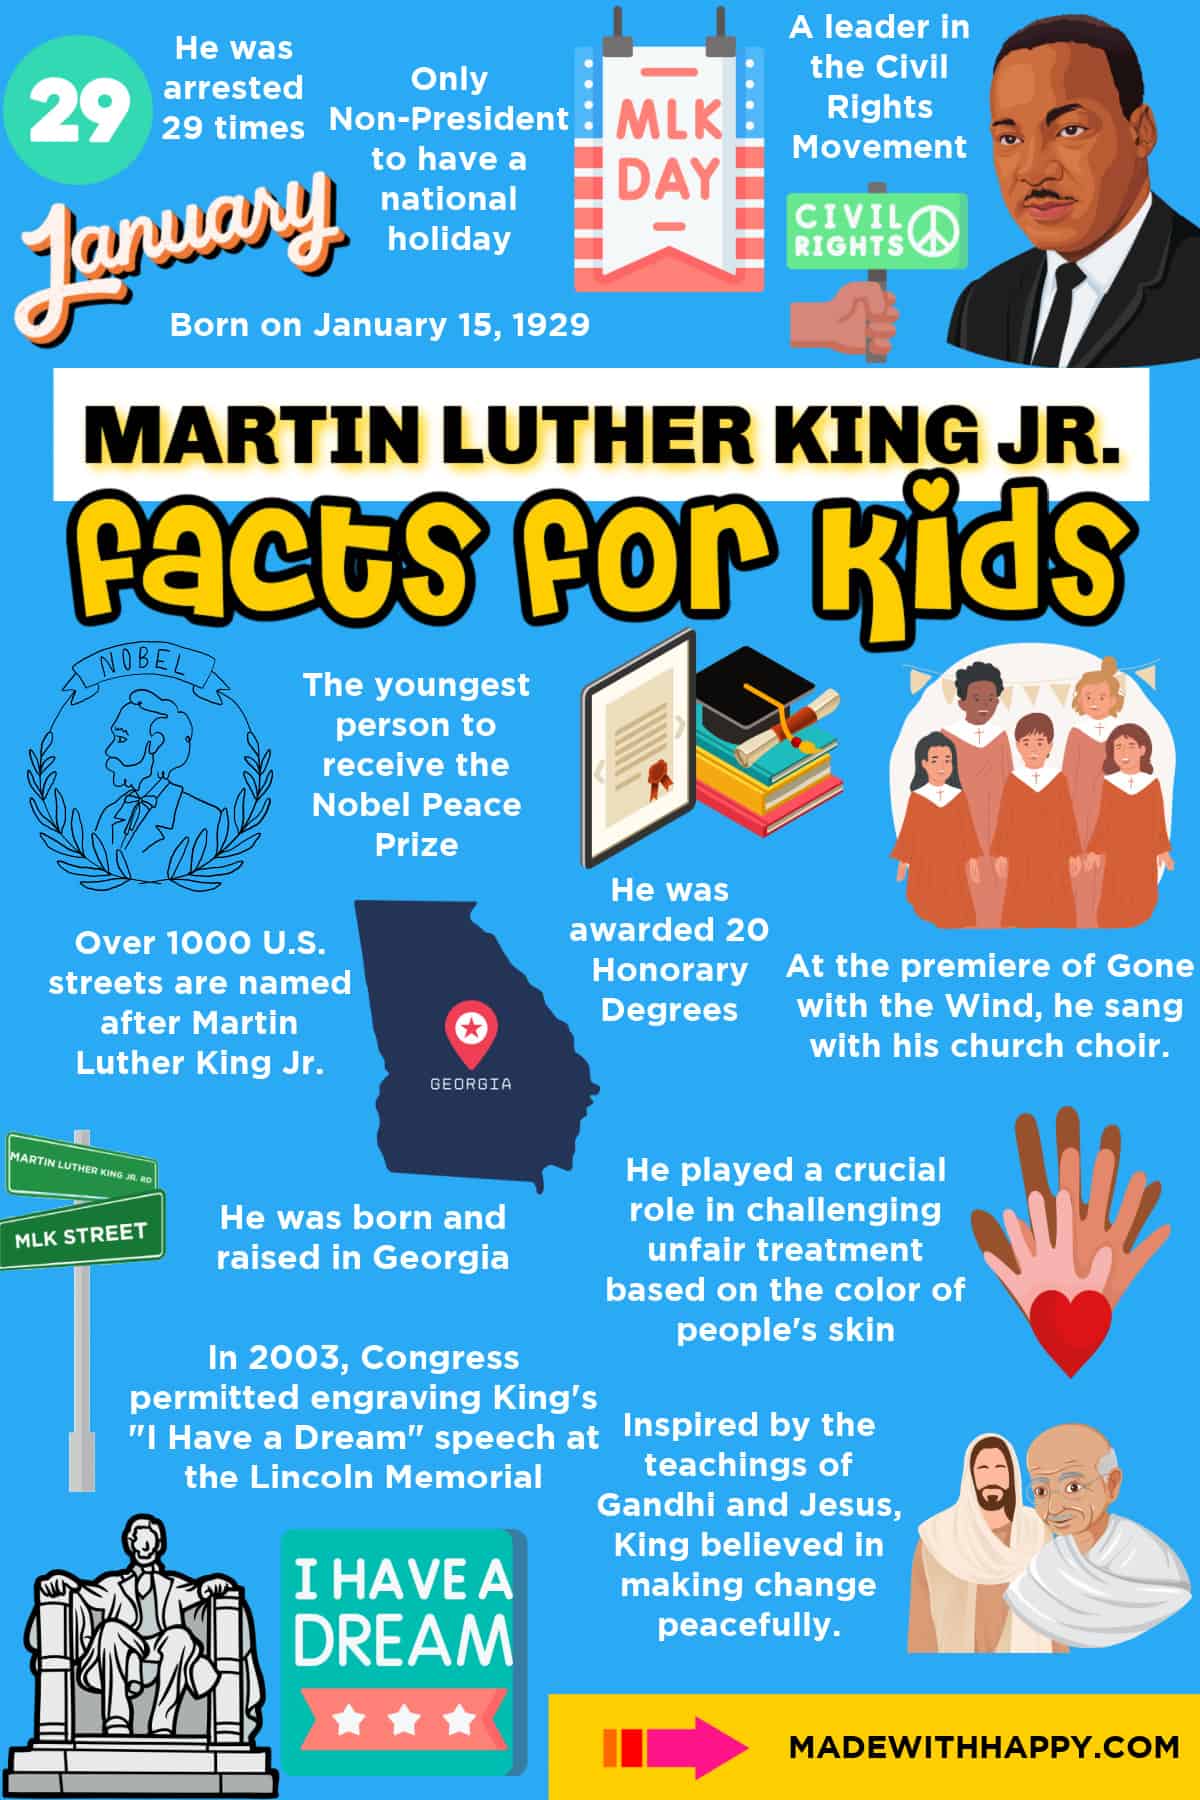 Fun Facts About Martin Luther King Jr.